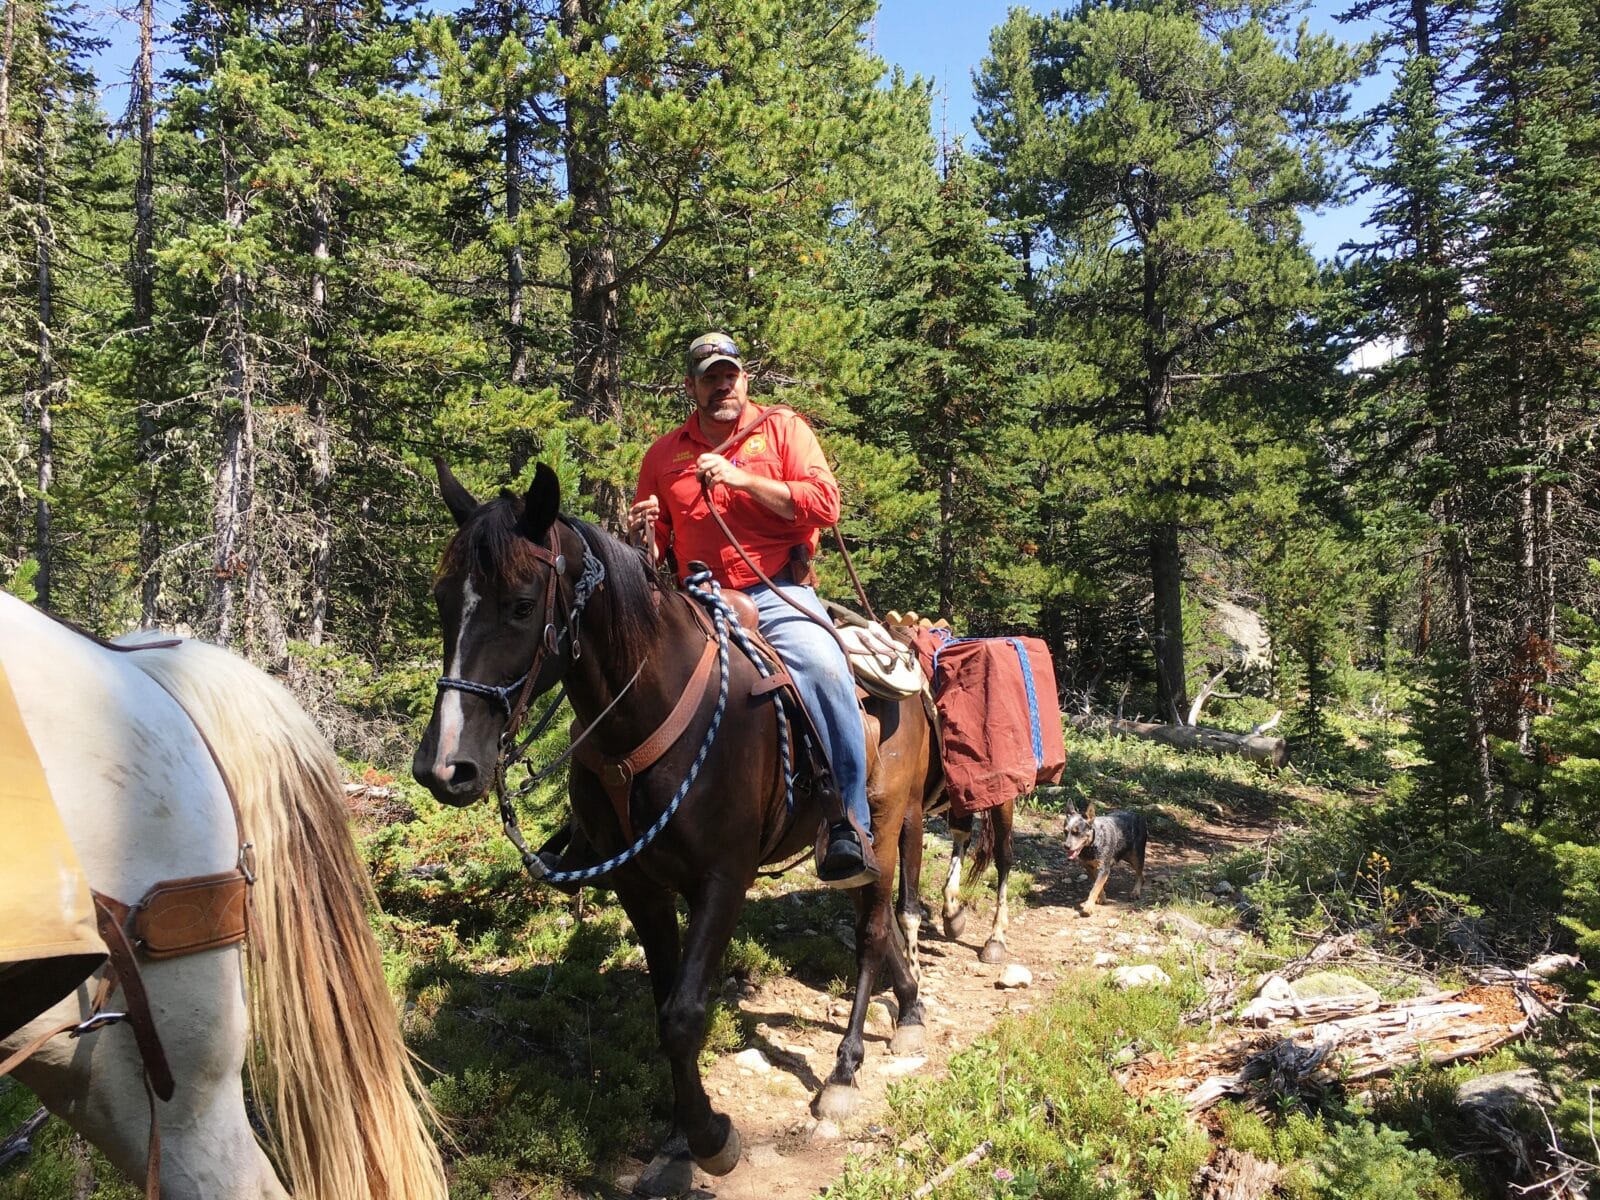 A game warden rides through a wooded trail on horseback with a cattle dog trailing behind.